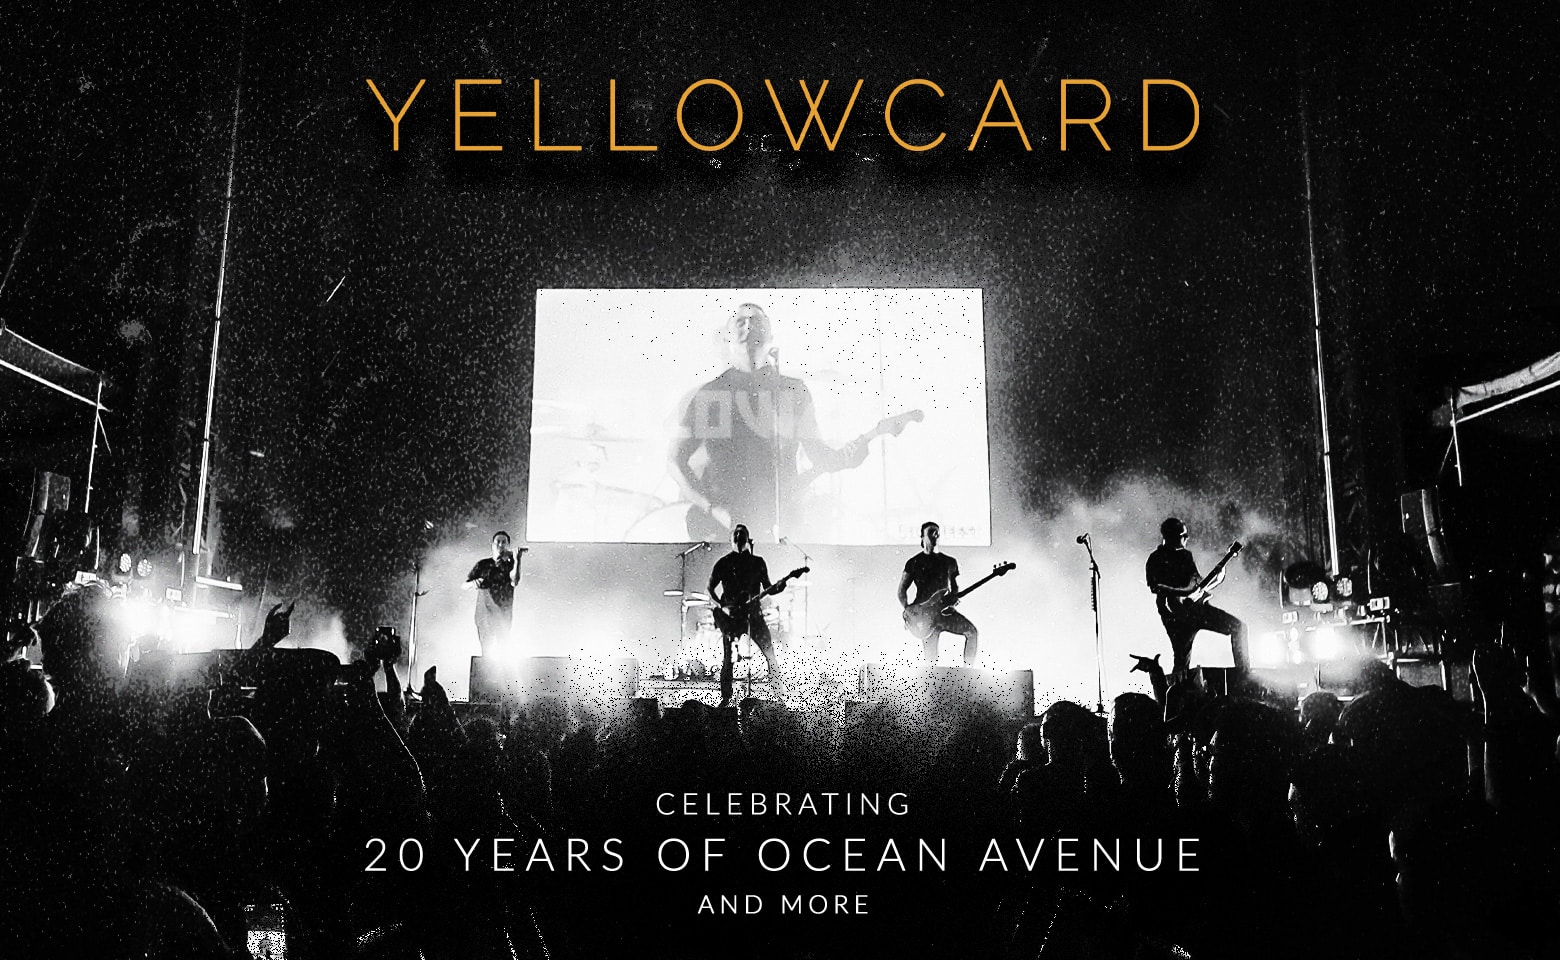 Yellowcard Celebrating 20 Years of Ocean Avenue The Rooftop at Pier 17